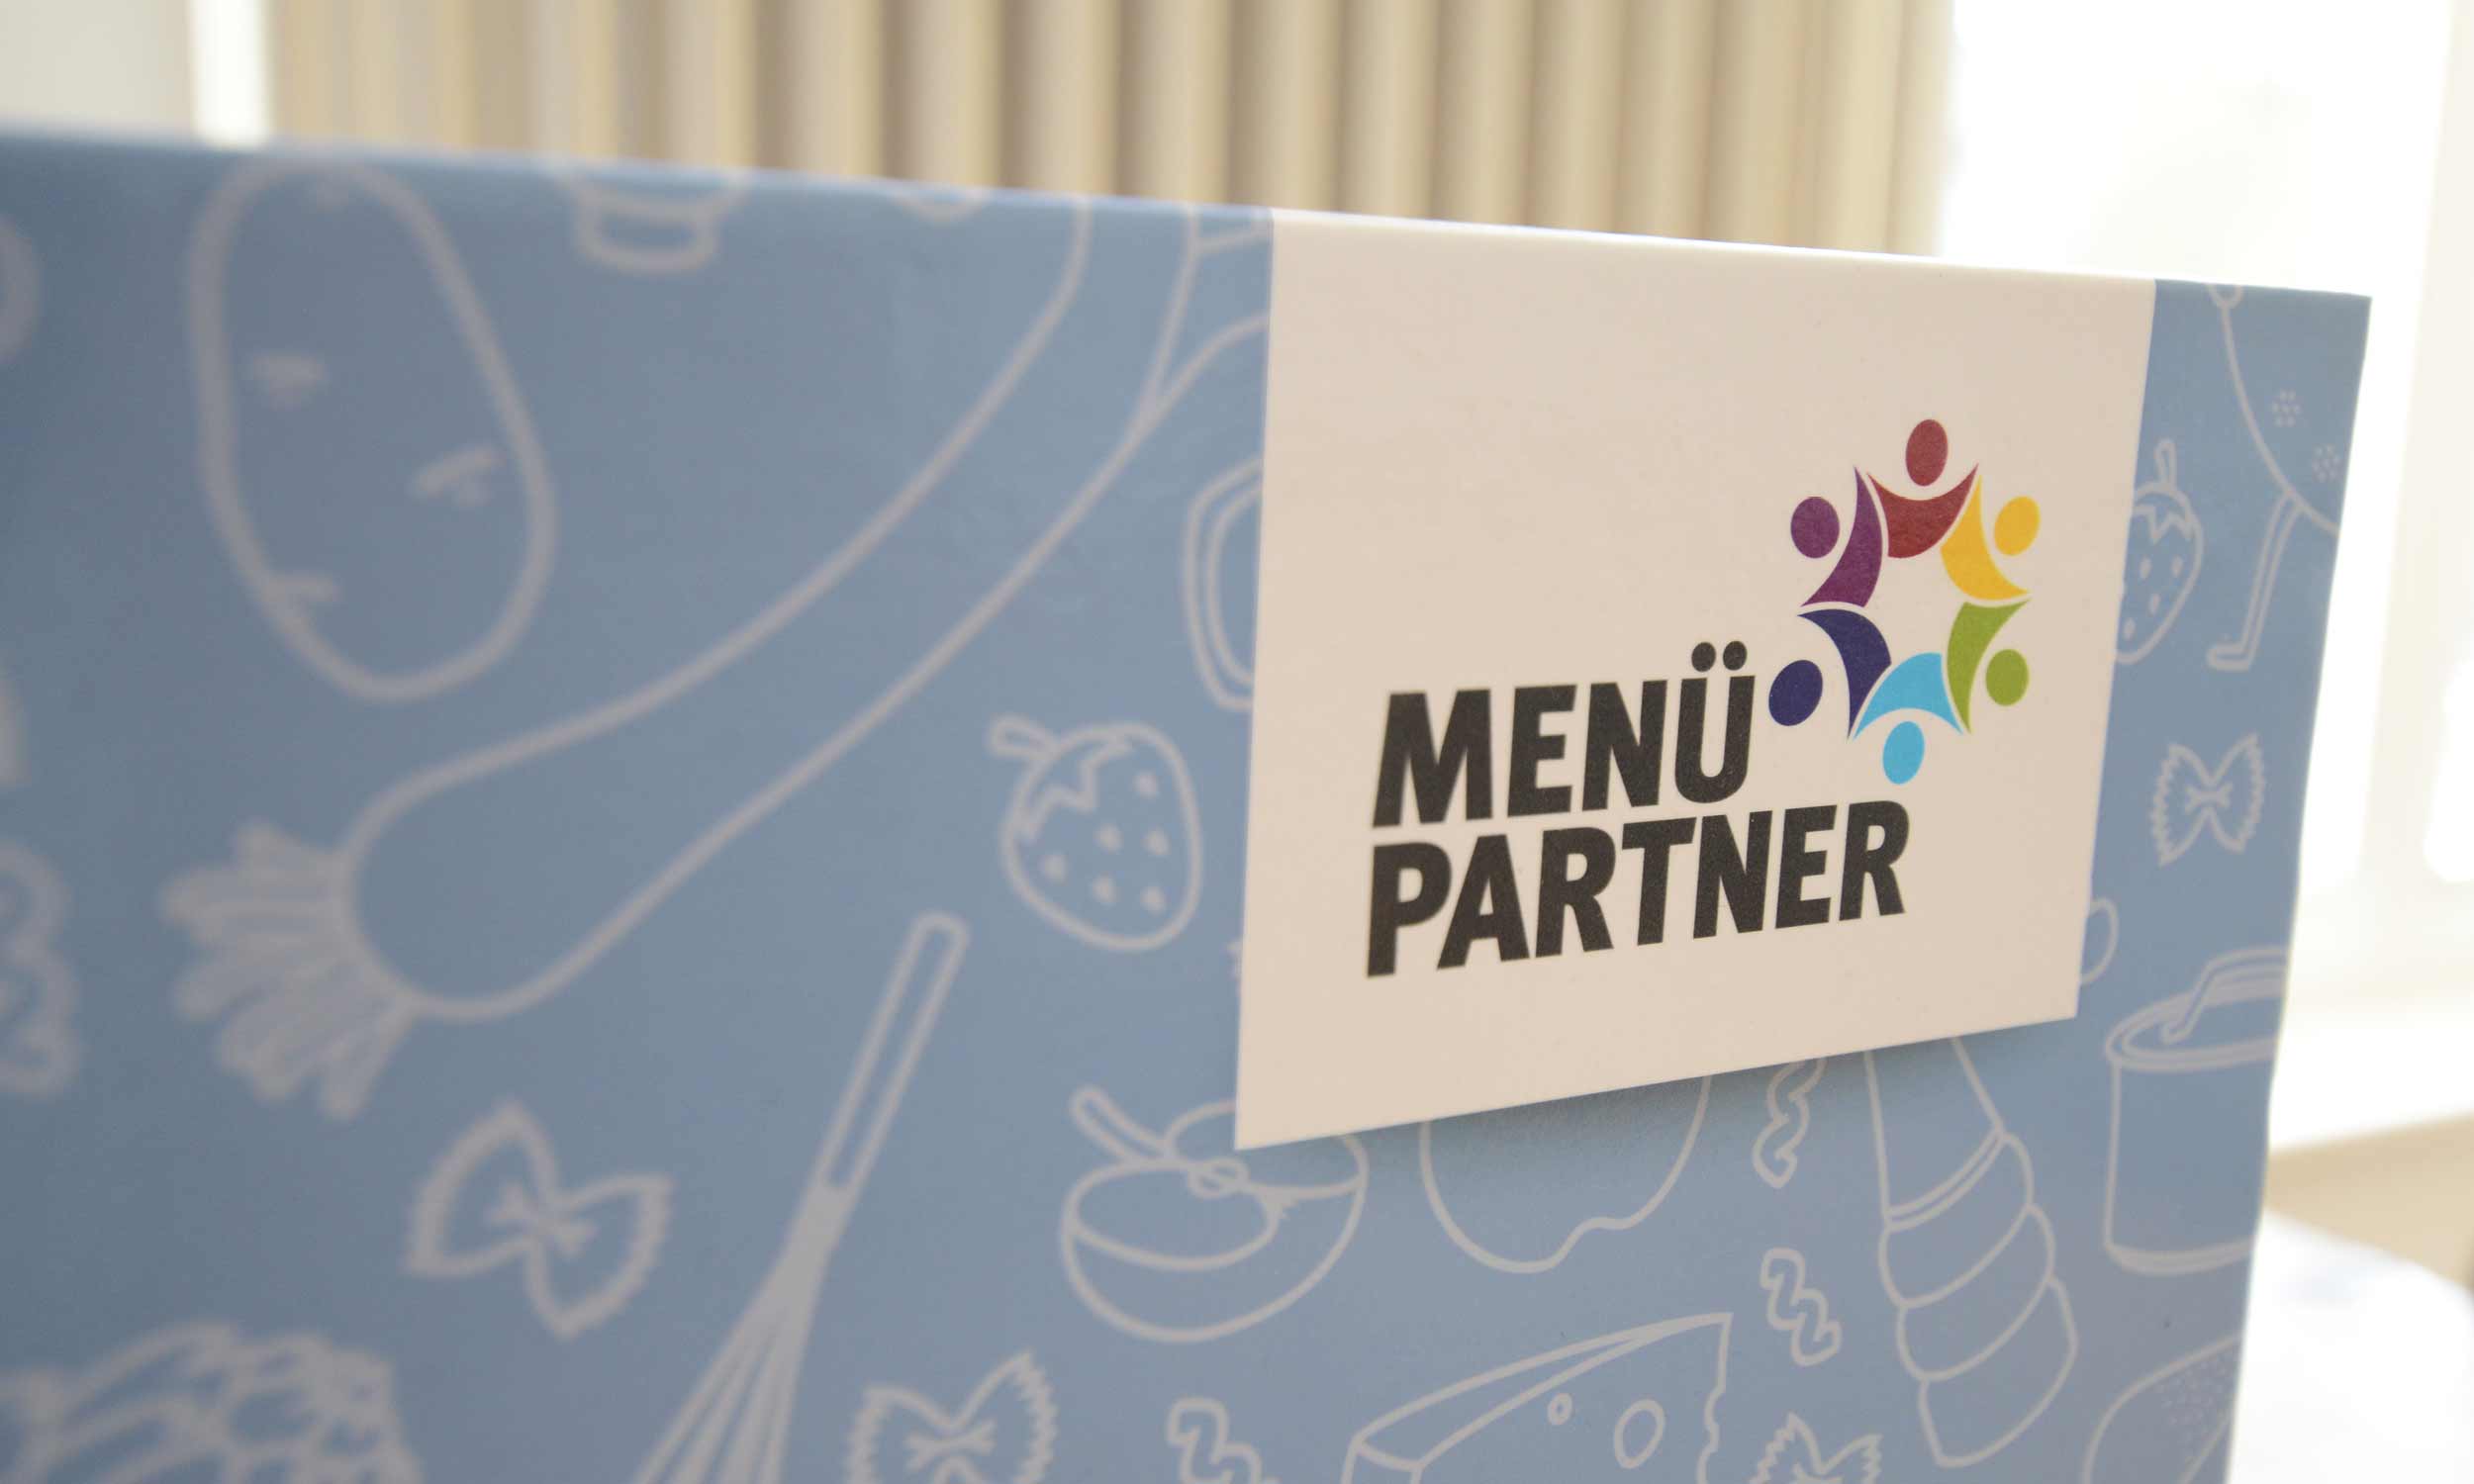 Photo of a designed menu partner ring binder with illustrative food items and the company logo.